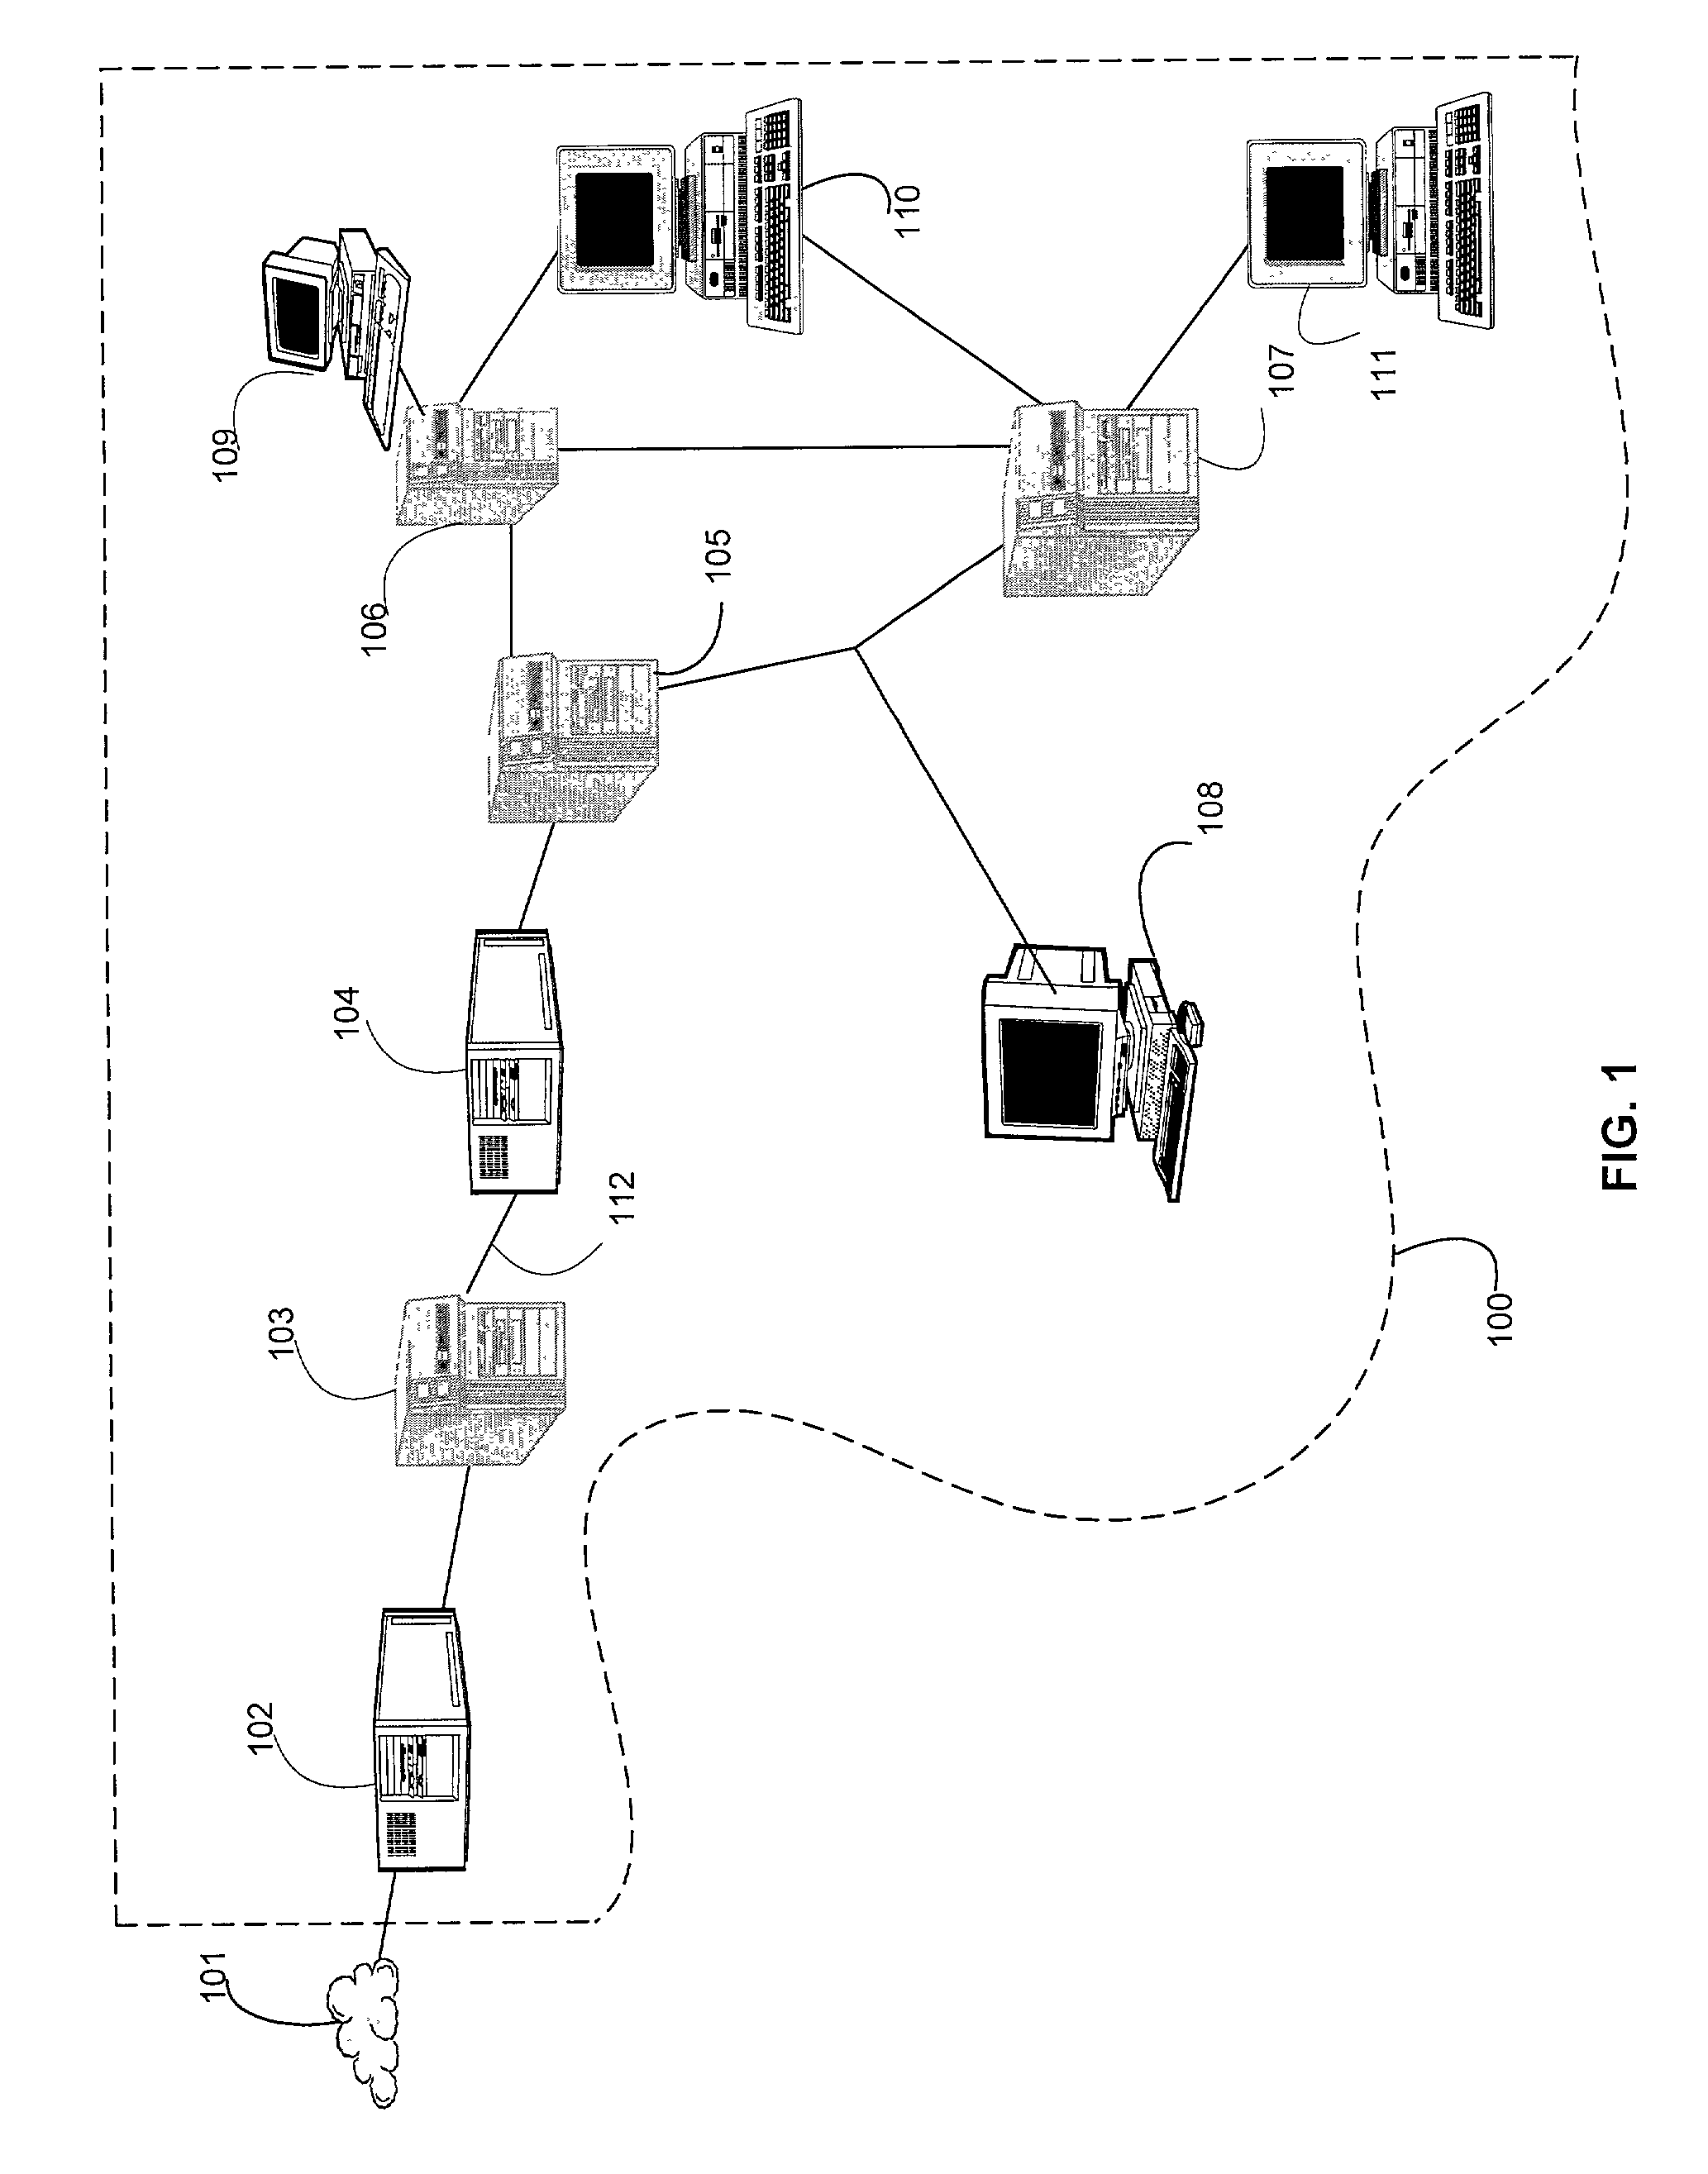 System and method for using agent-based distributed case-based reasoning to manage a computer network